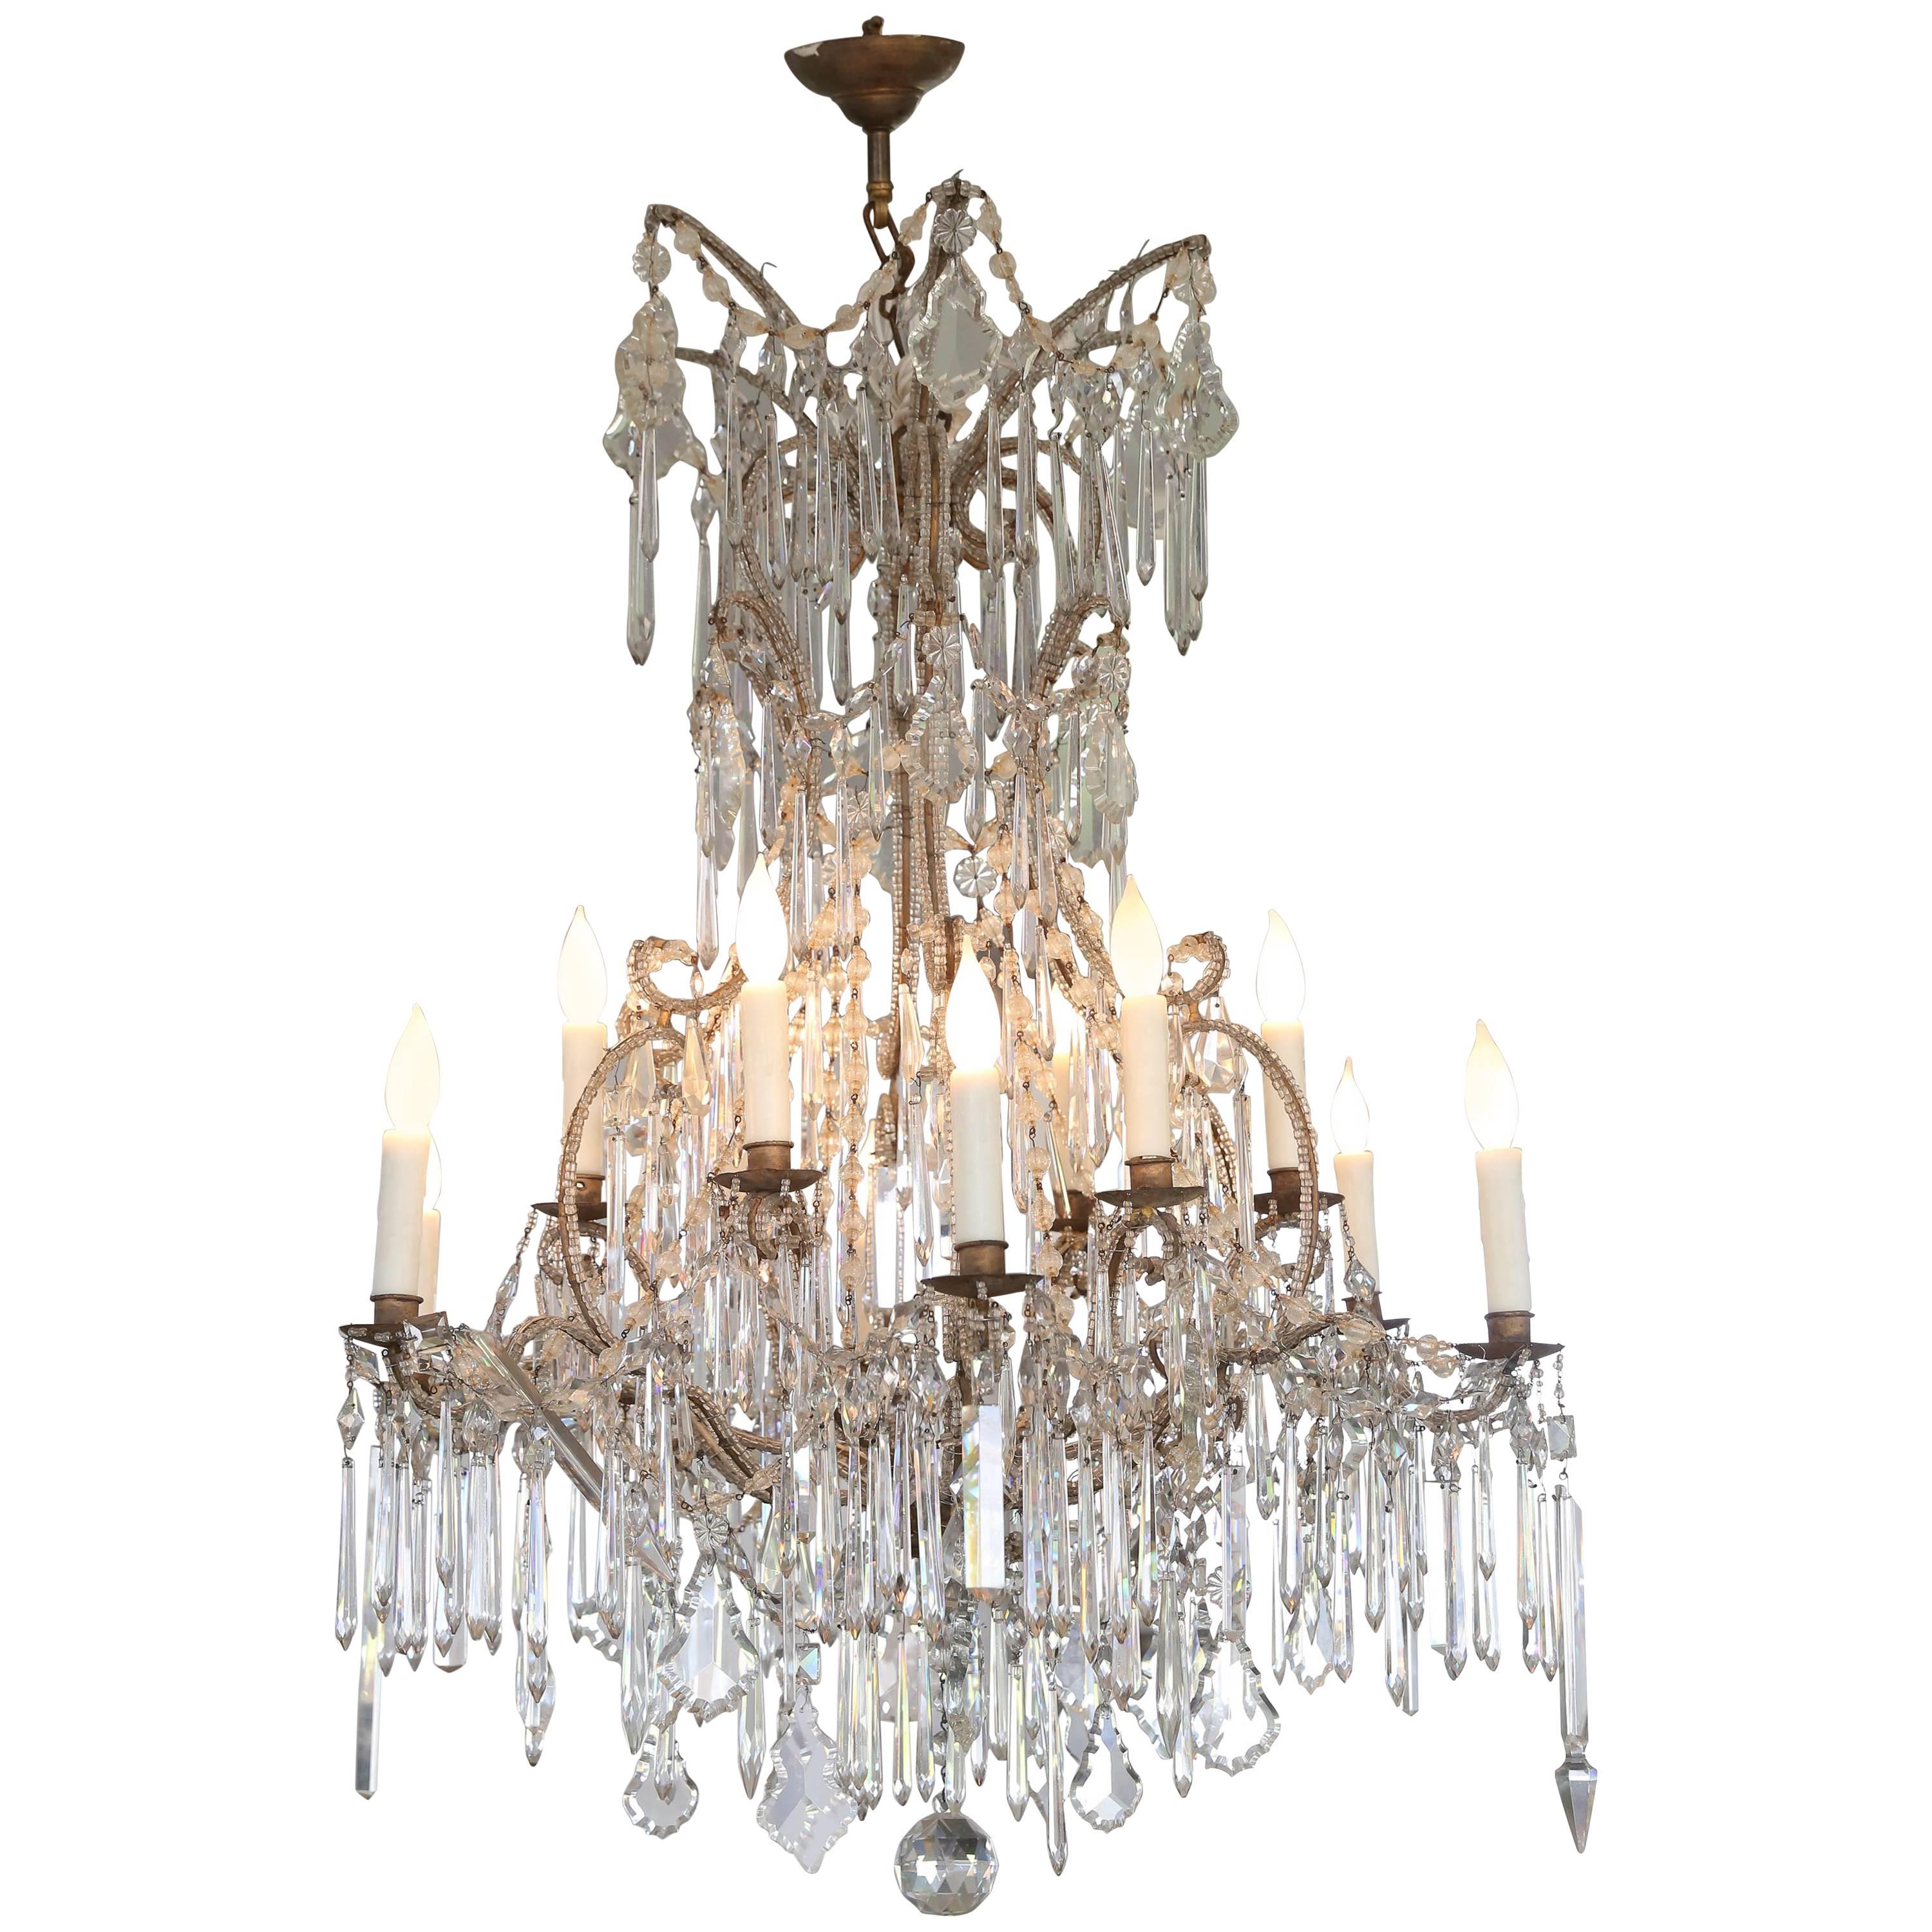 Italian Cascading Crystal Chandelier from Genoa From The Early 1900s